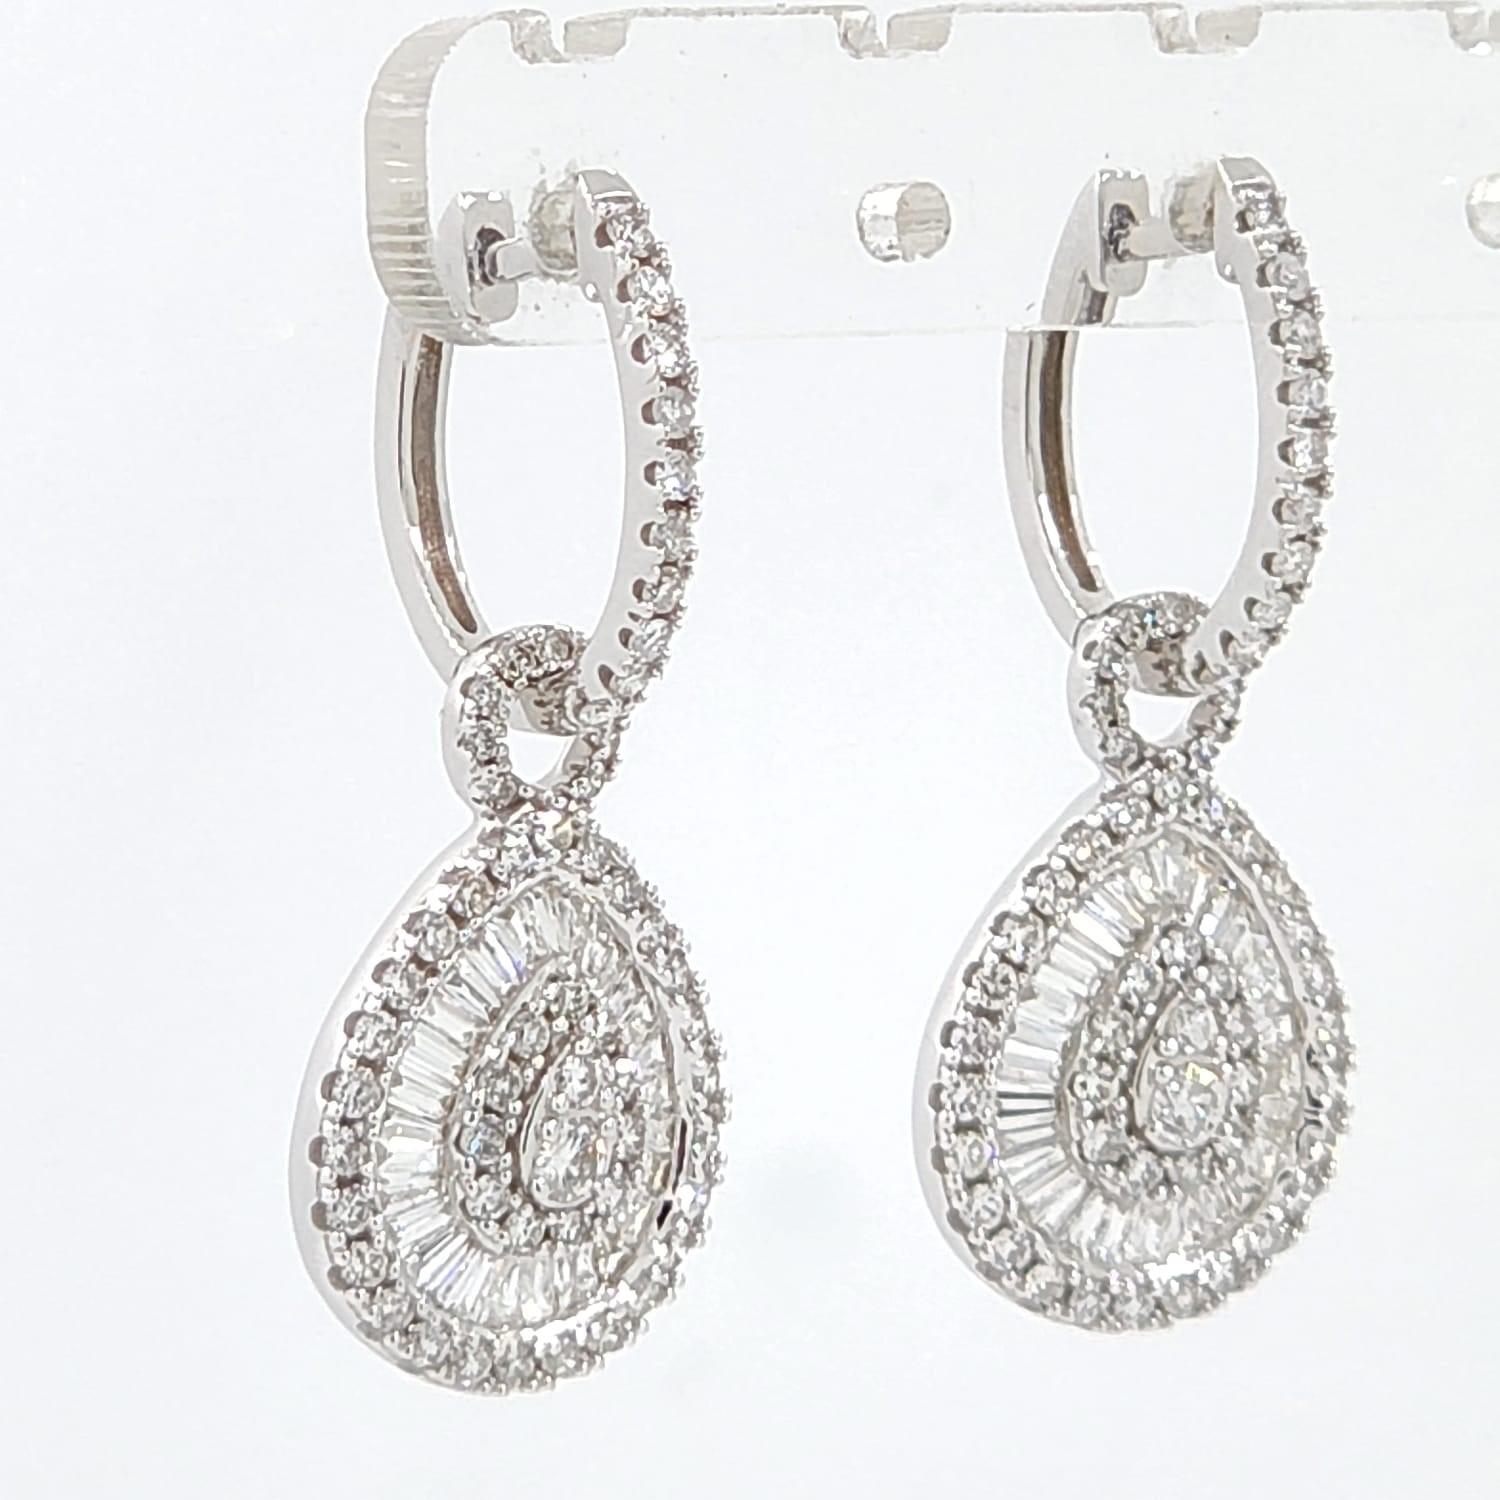 This earrings feature 0.53 carat of tapered diamonds and assented with 0.87 carat of round diamonds. Earrings are set in 14 karat white gold.

Taper Baguette Diamonds 0.53 carat
Round Diamonds 0.87 carat
14 Karat White Gold